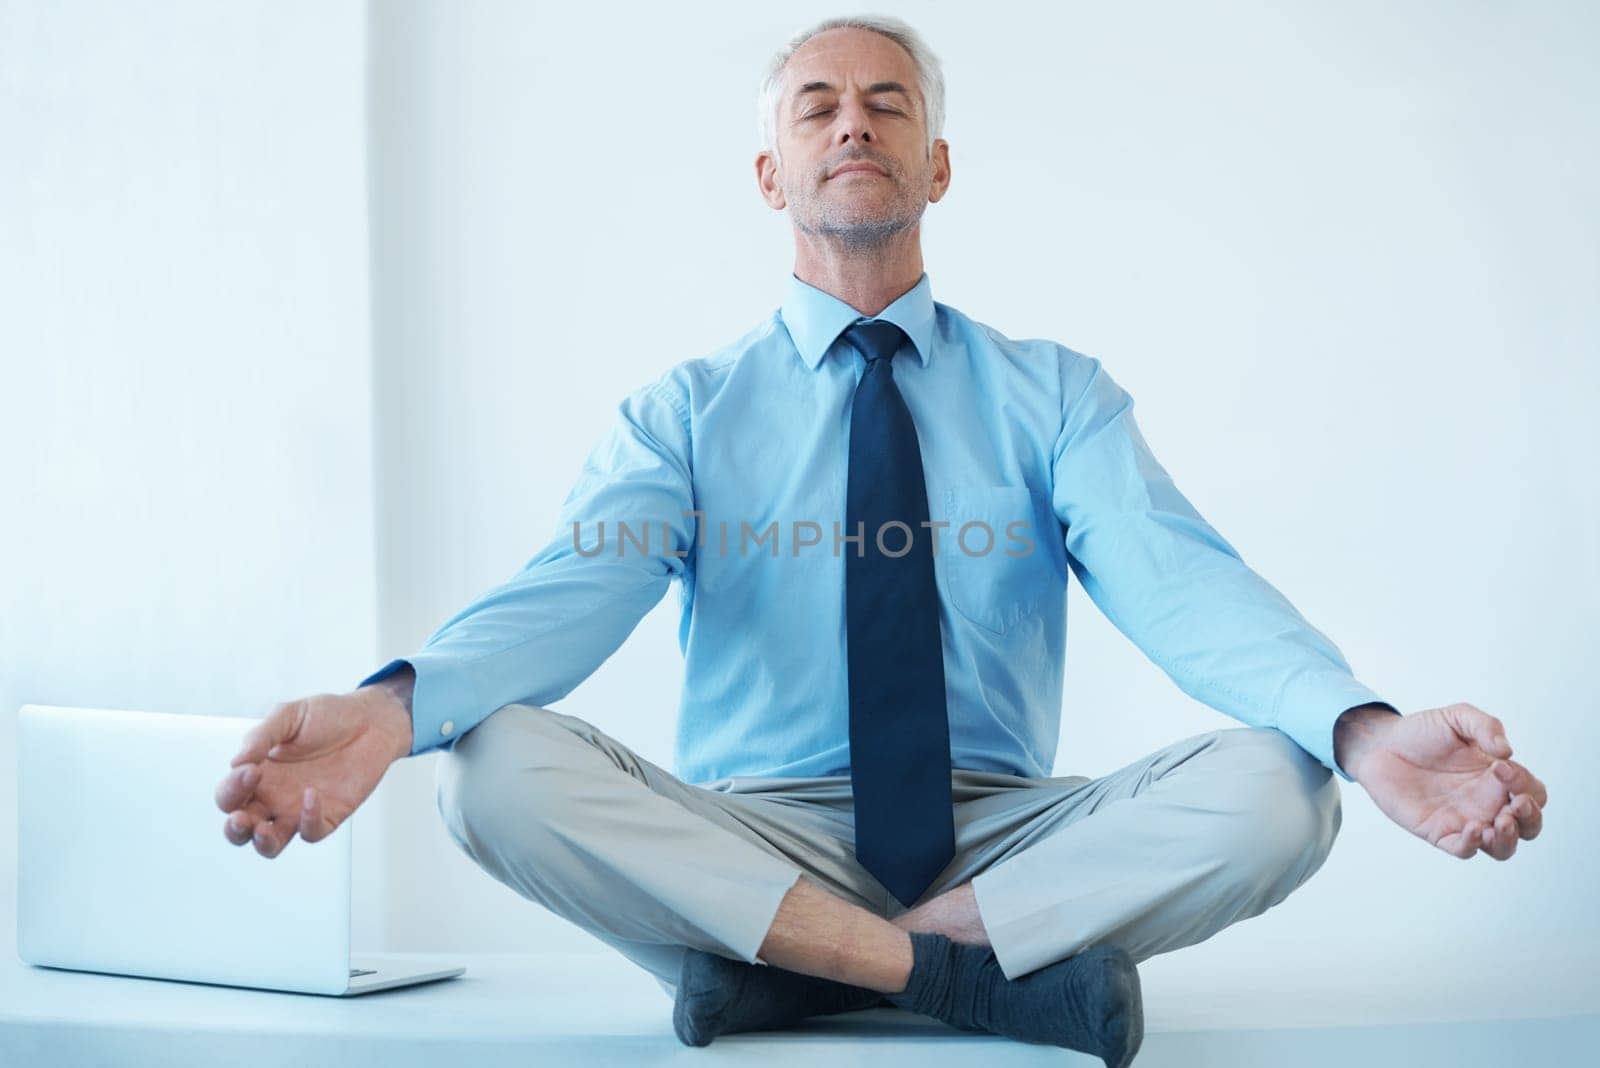 Businessman, meditation and hands for calm wellness for work stress relief or corporate, professional or mental health. Male person, lawyer and legs crossed for zen practice, mindfulness or peace.